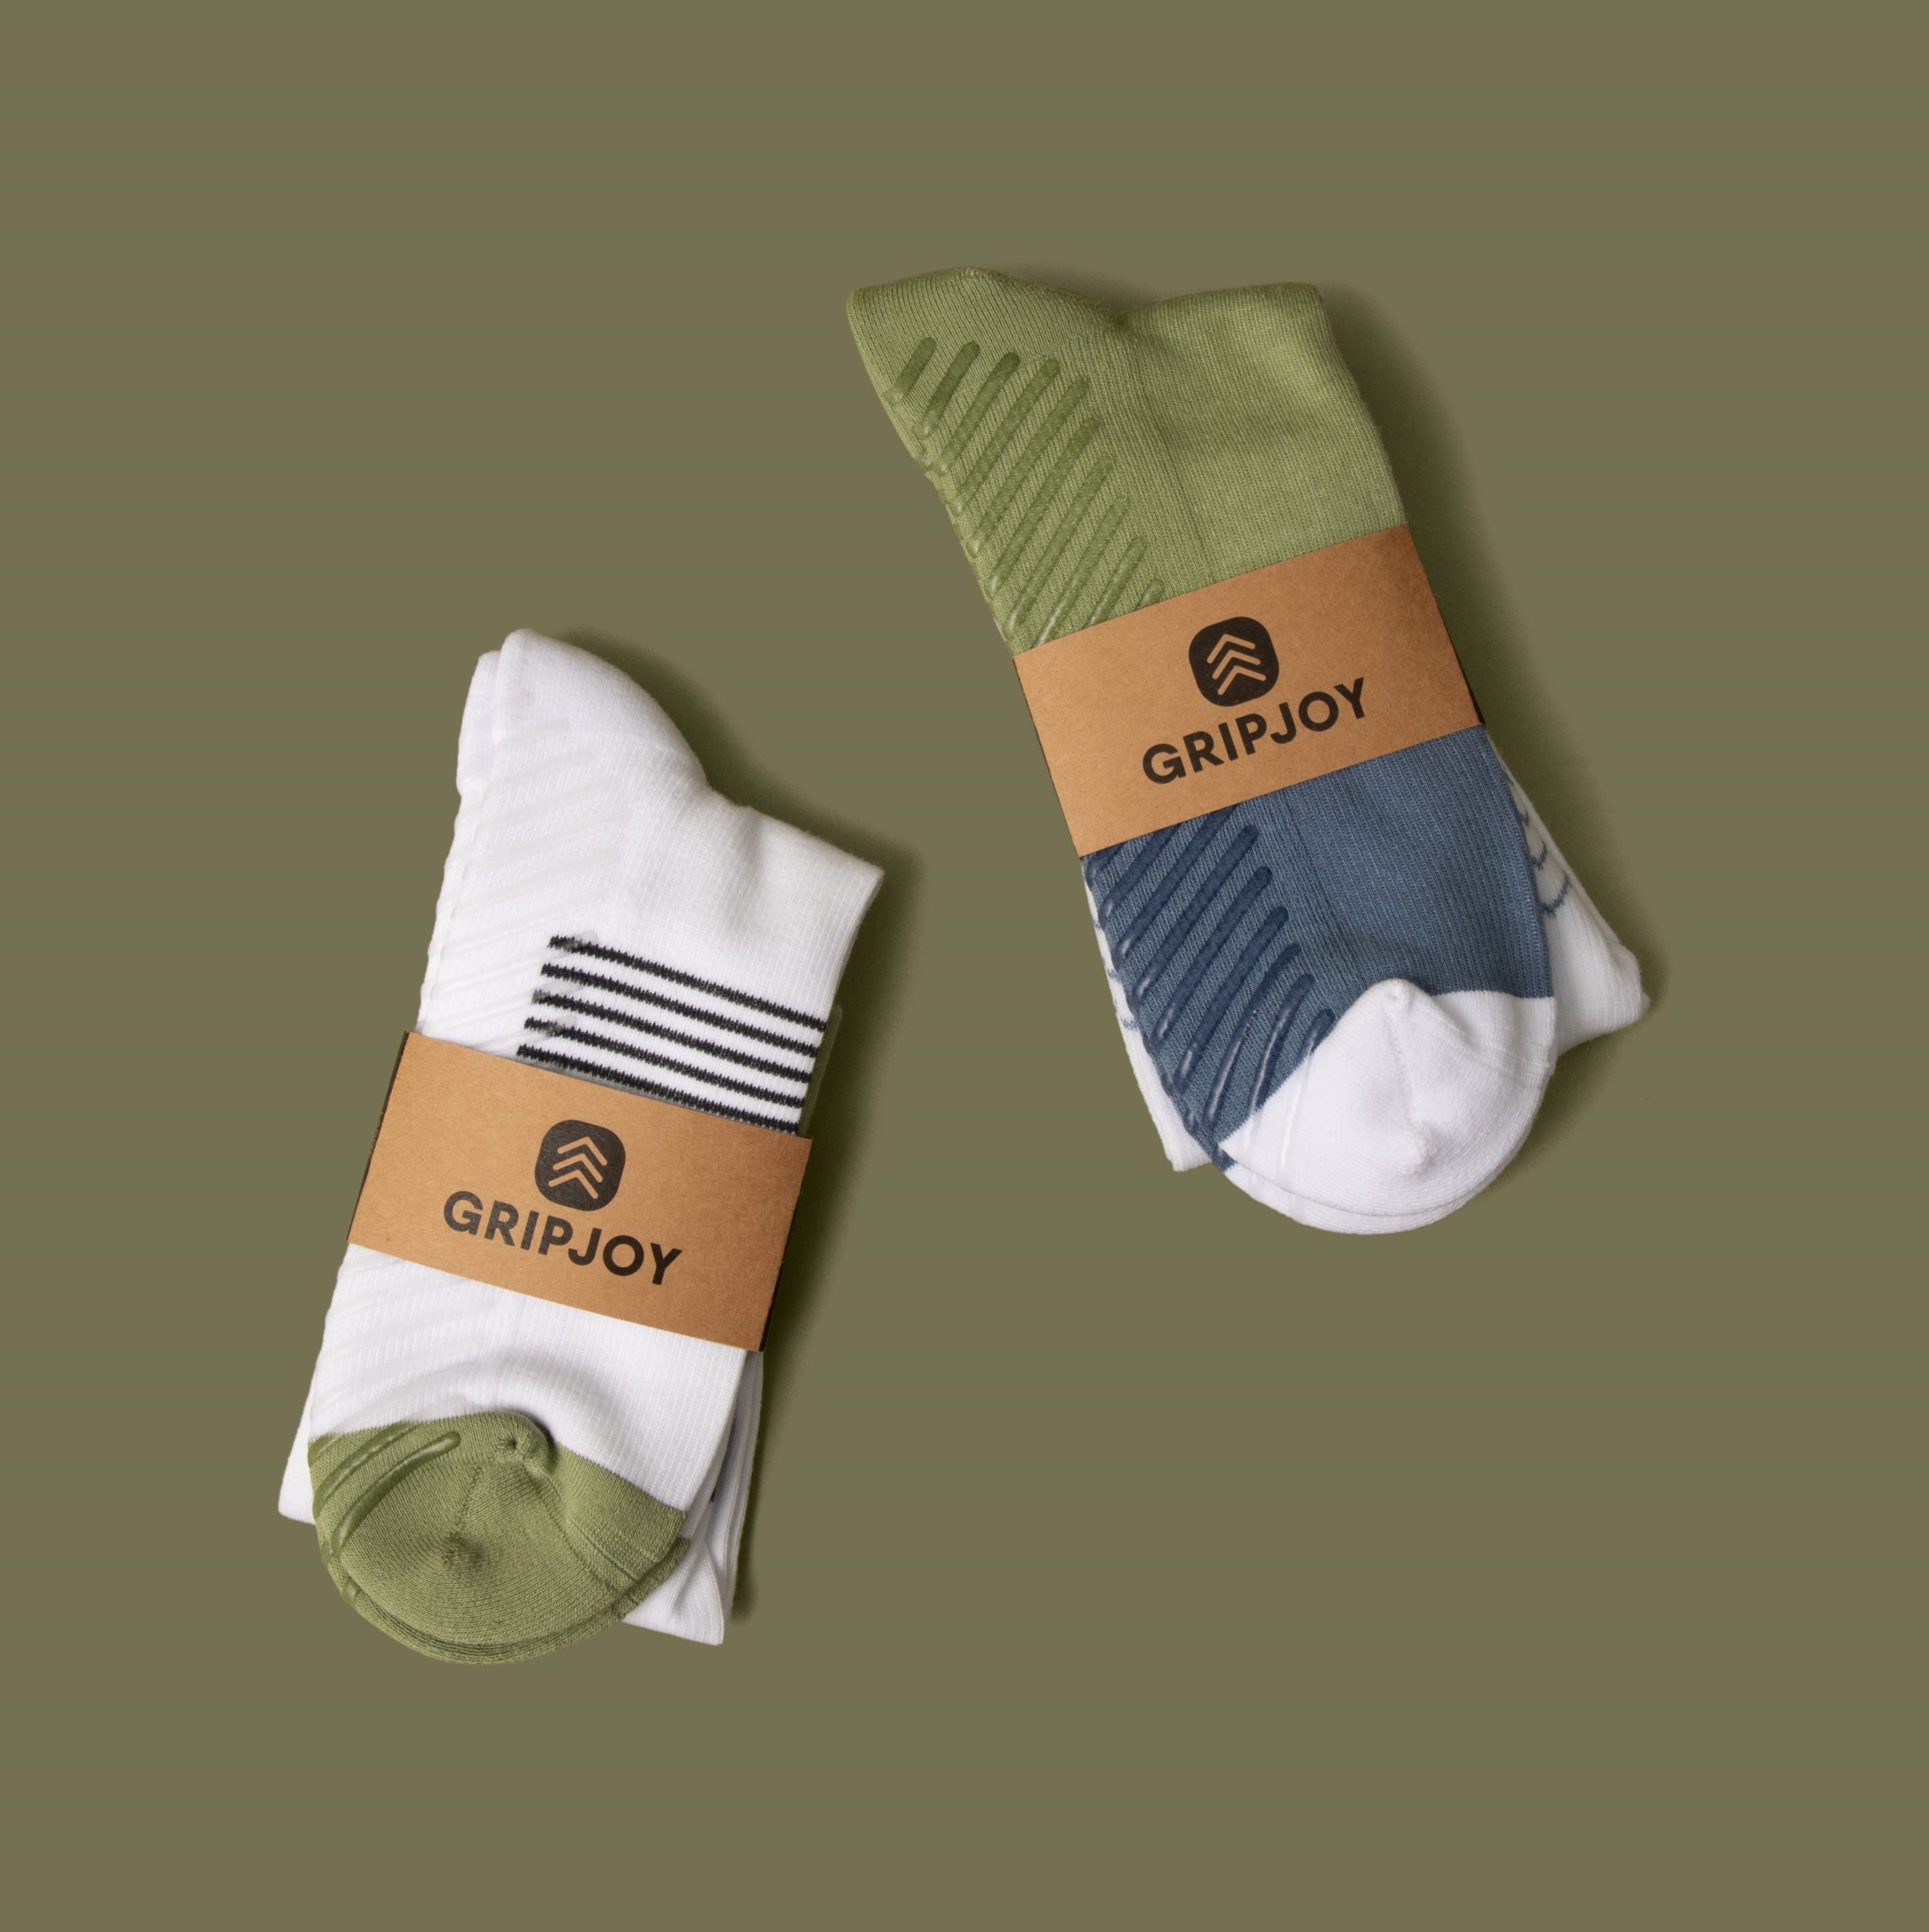 New Gripjoy Men's Crew Socks with Grips (Pack of 3)